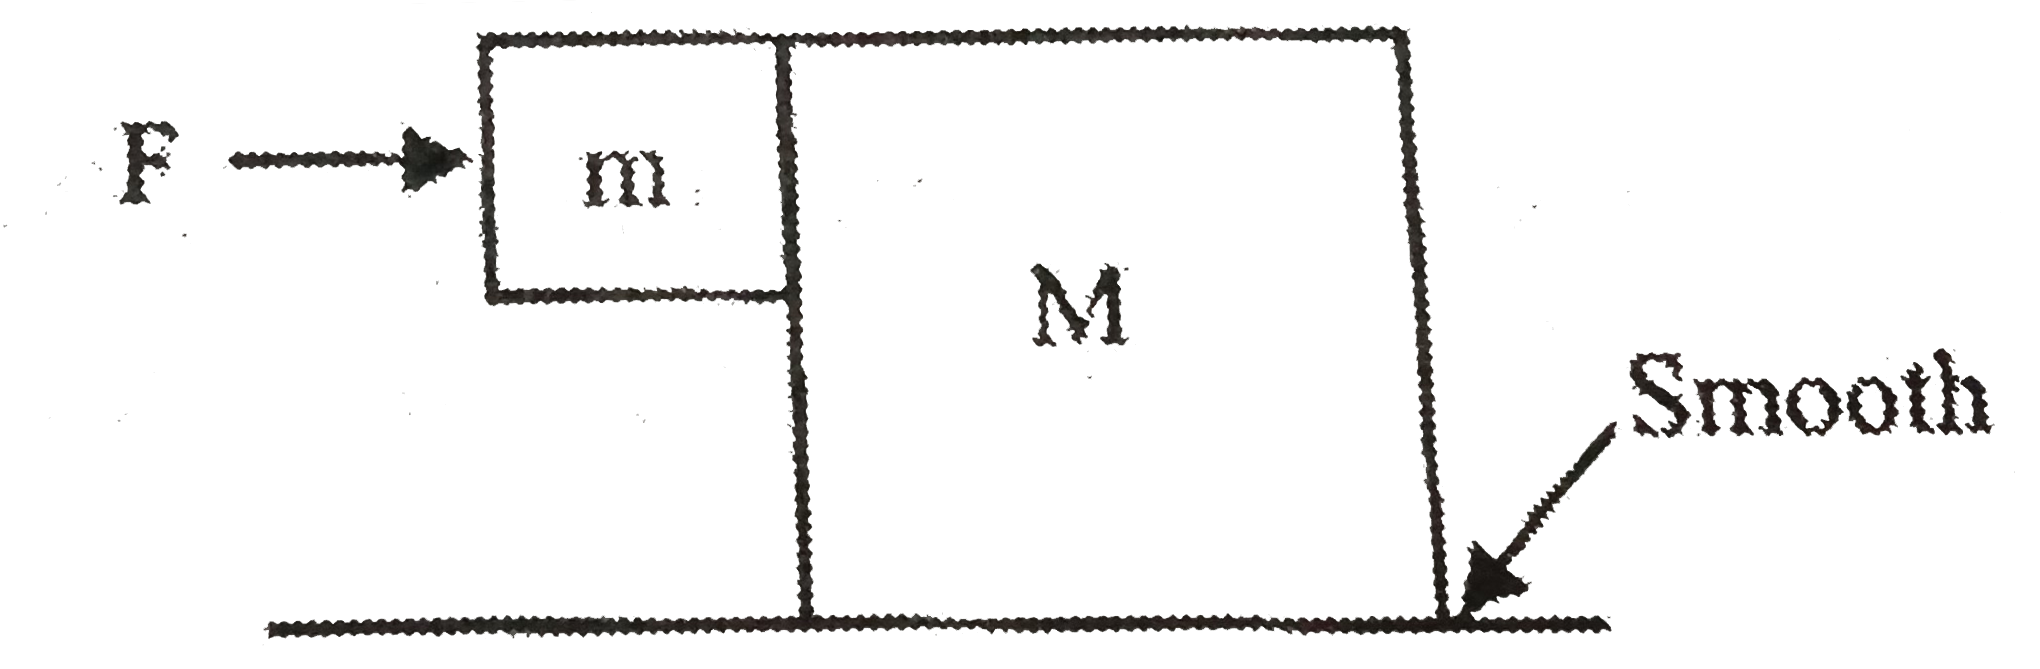 The two blocks, m= 10 kg and M = 50 kg are free to move as shown. The coefficient of static friction between the blocks is 0.5 and there is no friction between M and the ground. A minimum horizontal force F is applied to hold m against M that is equal to -